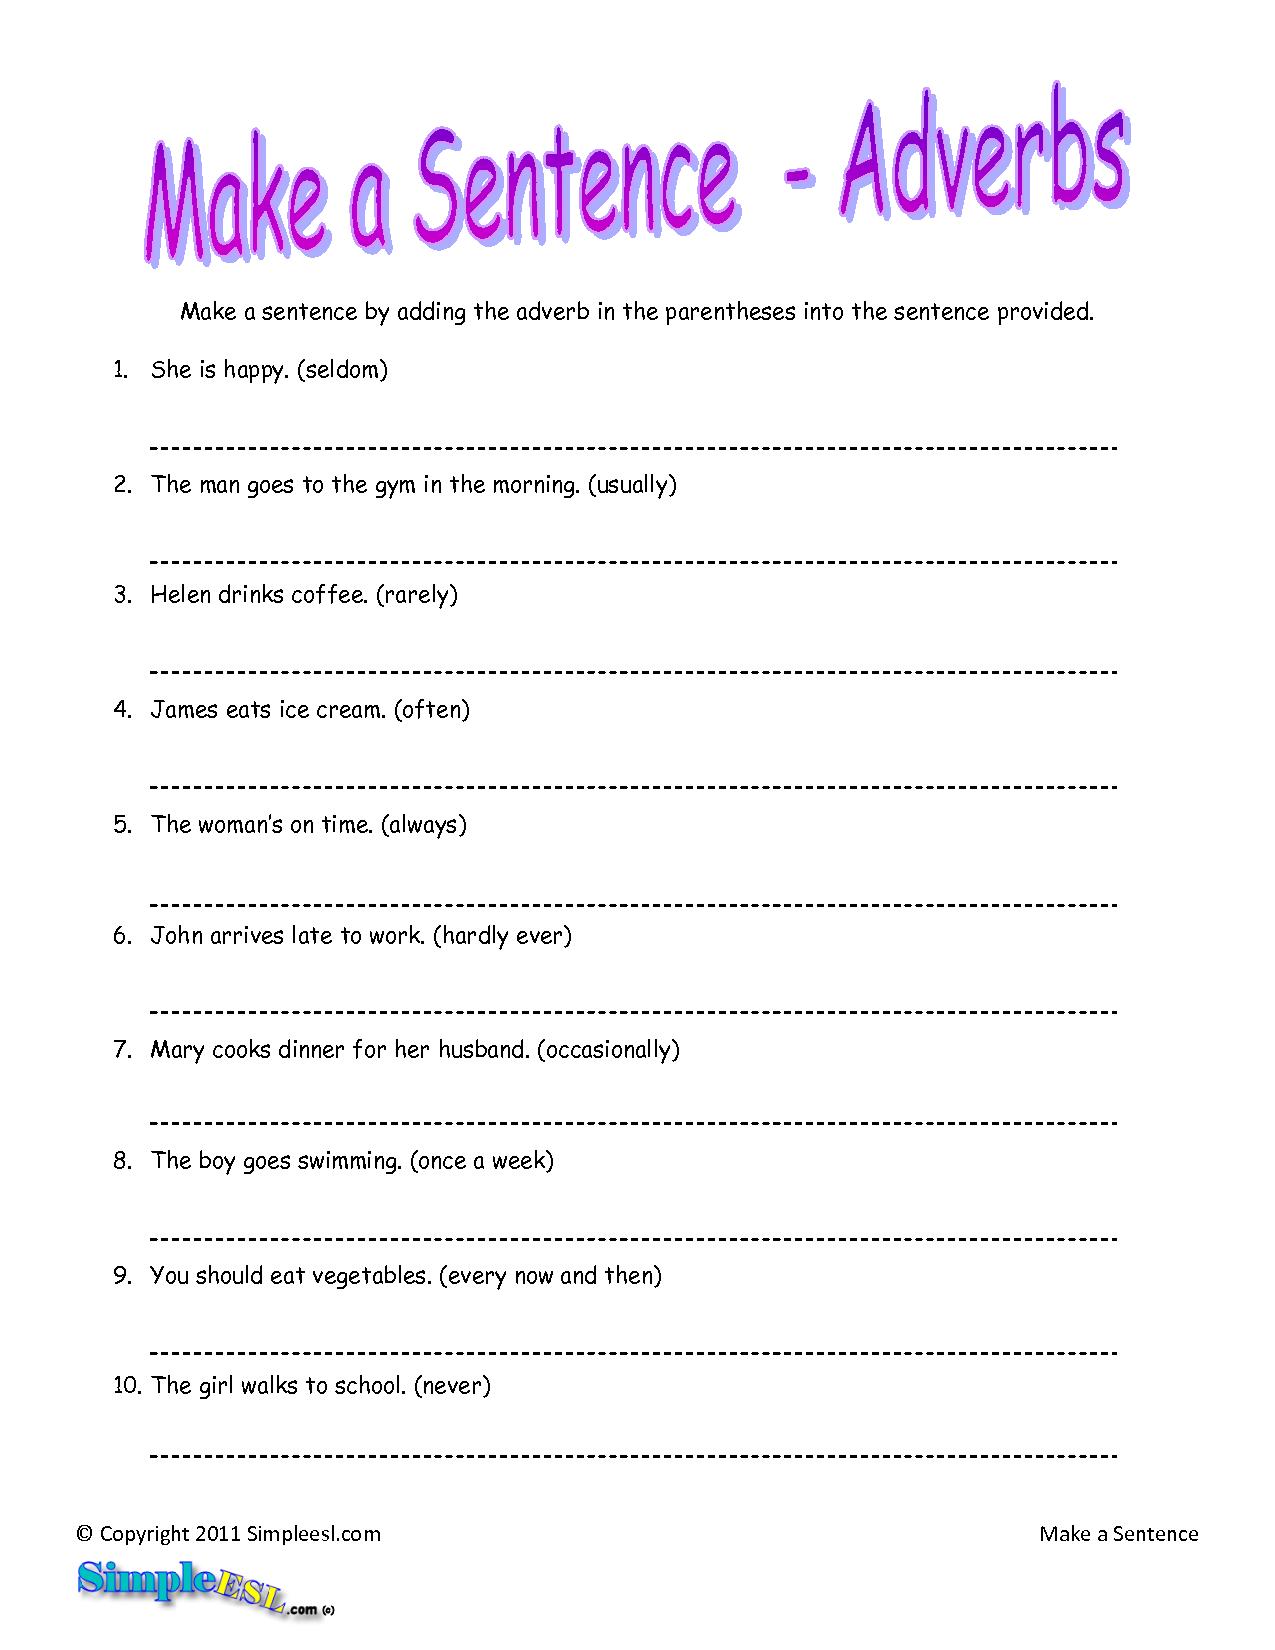 adverbs-online-activity-for-grade-3-adverbs-worksheet-2nd-grade